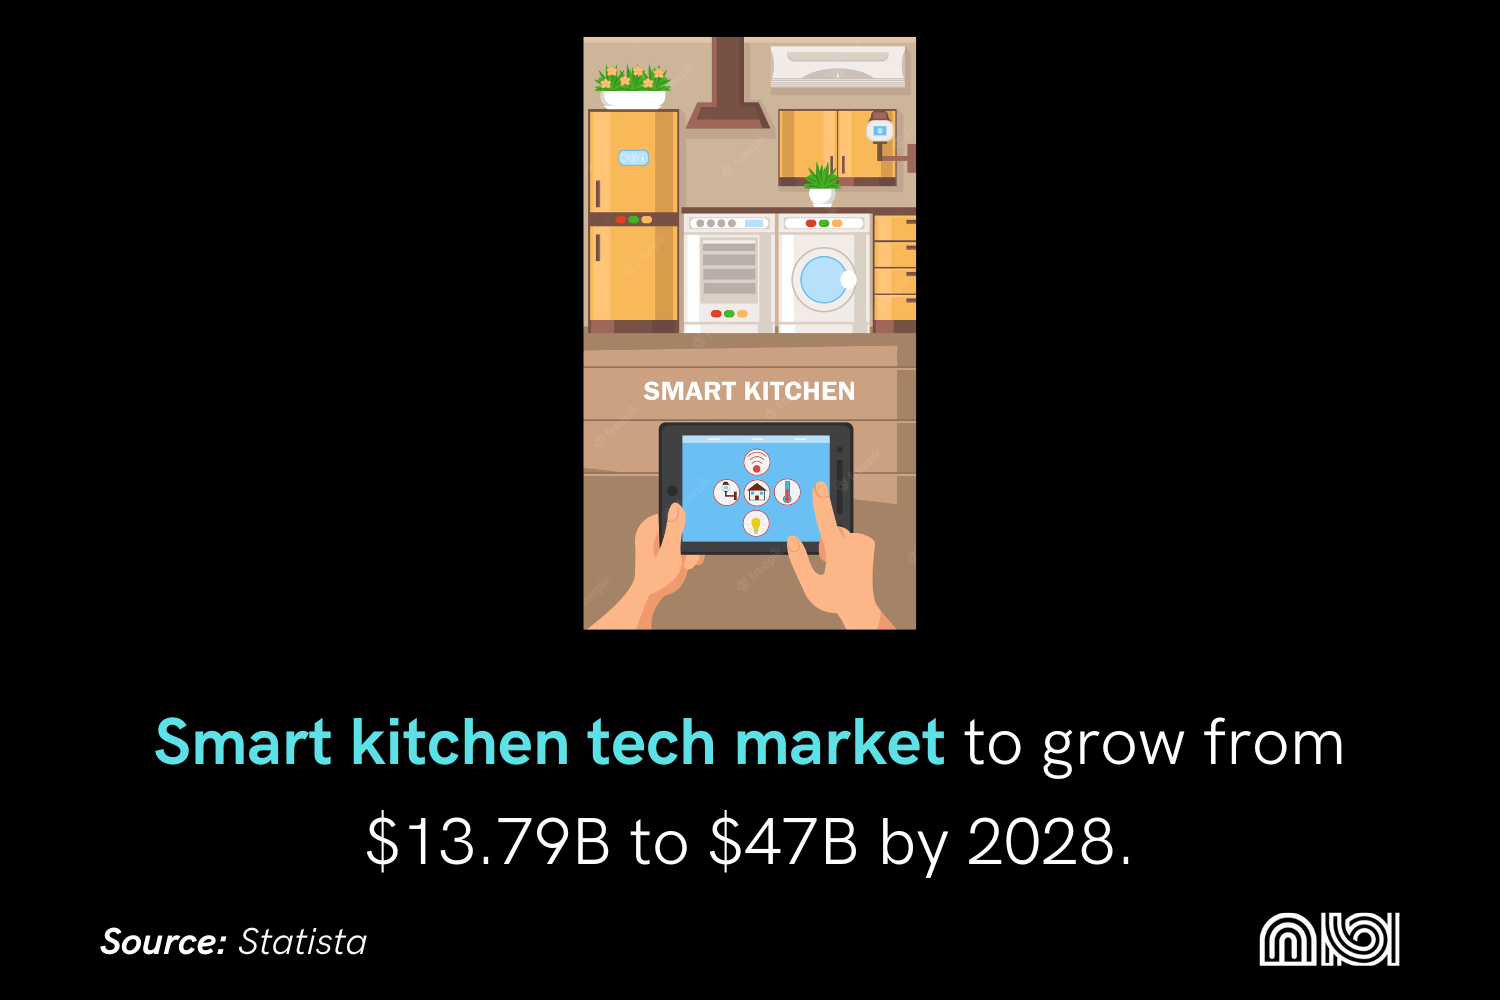 Statistic showing growth of the Smart kitchen technology market.